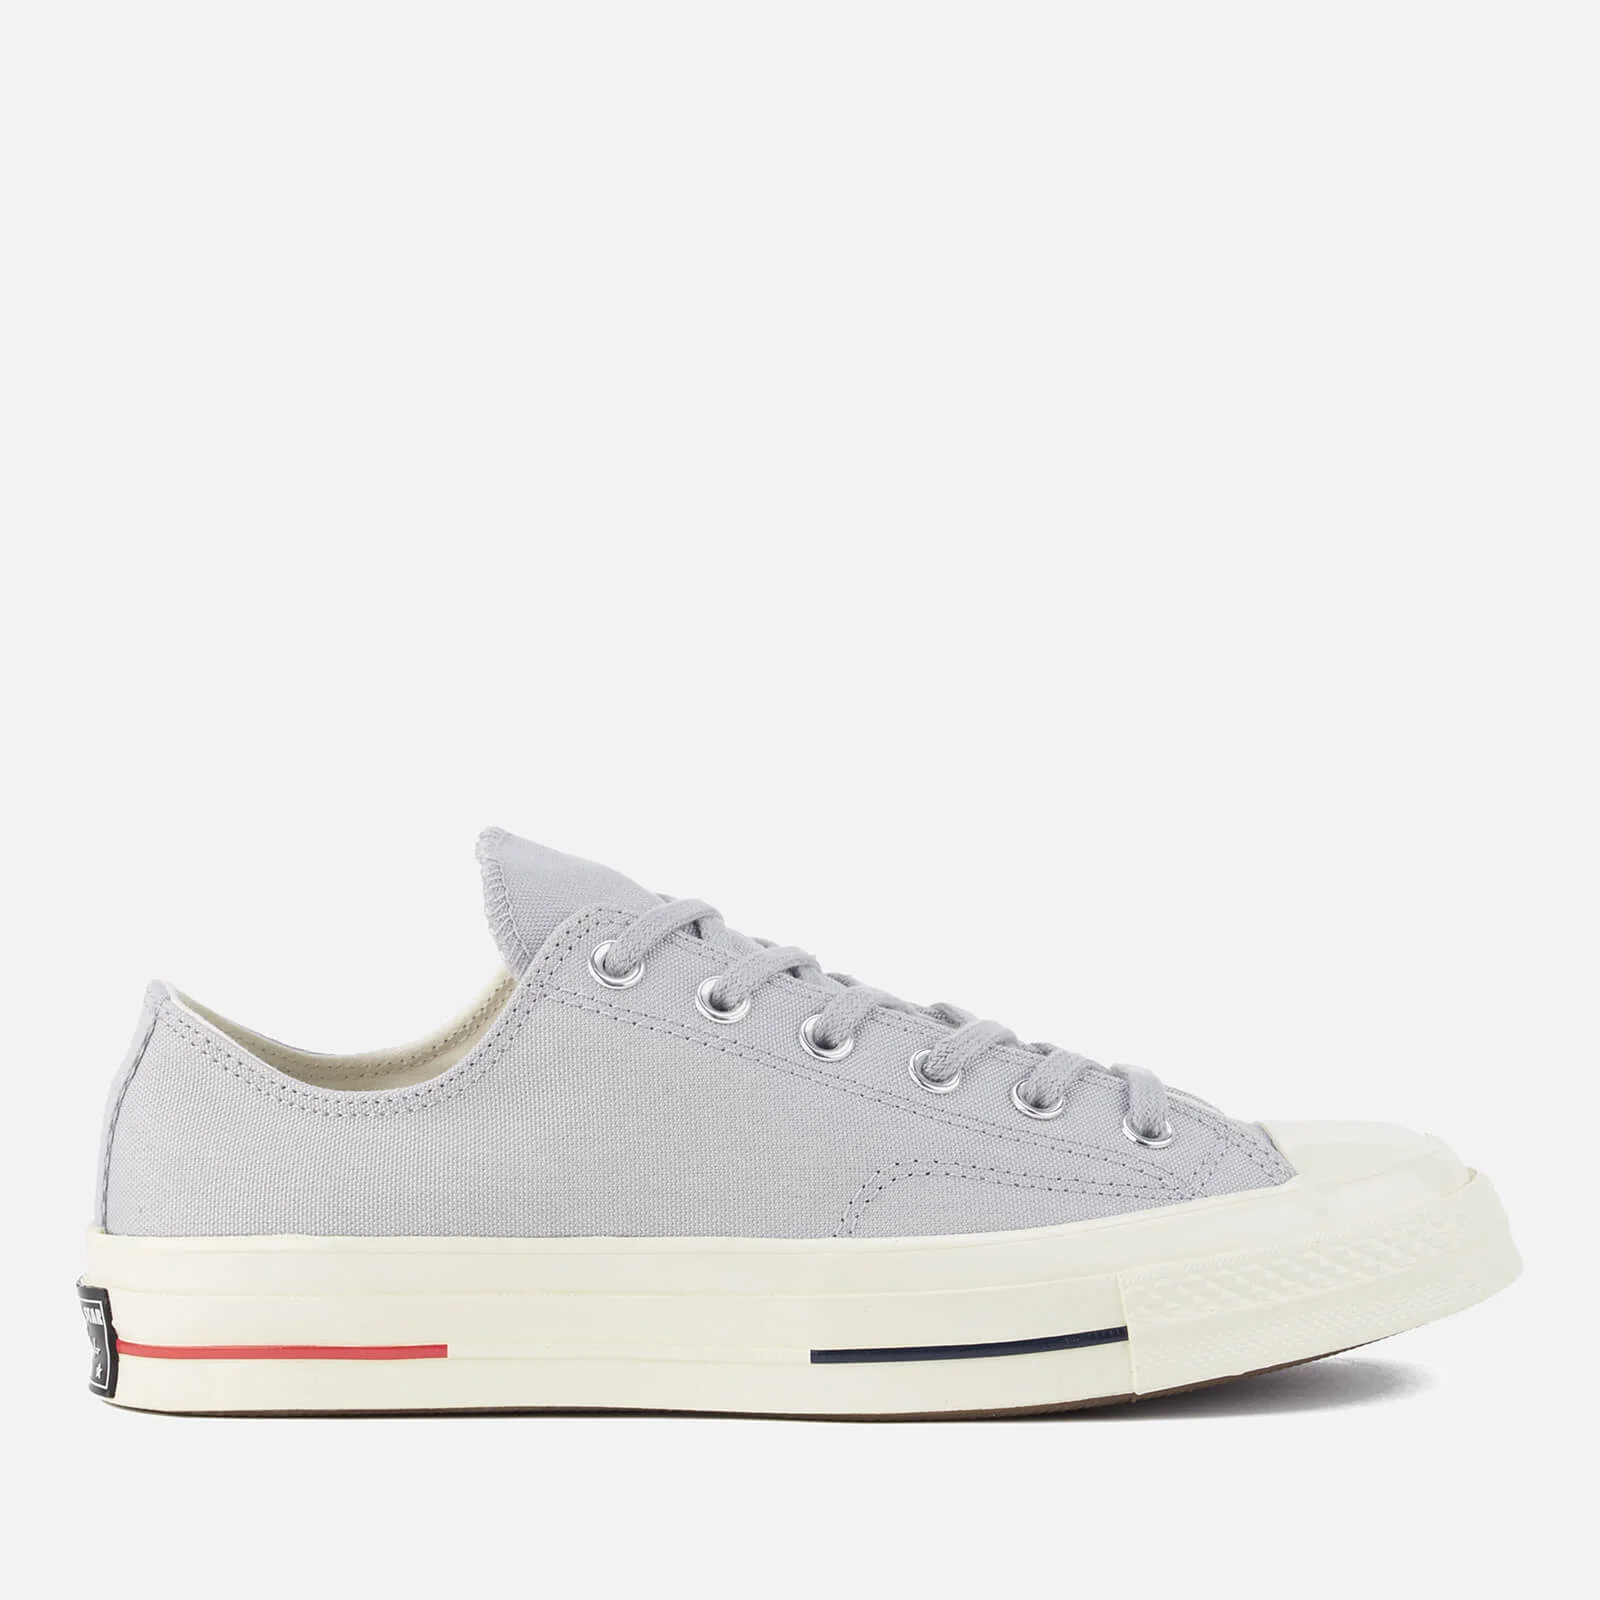 Converse Men's Chuck Taylor All Star '70 Ox Trainers - Wolf Grey/Navy/Gym Red Image 1